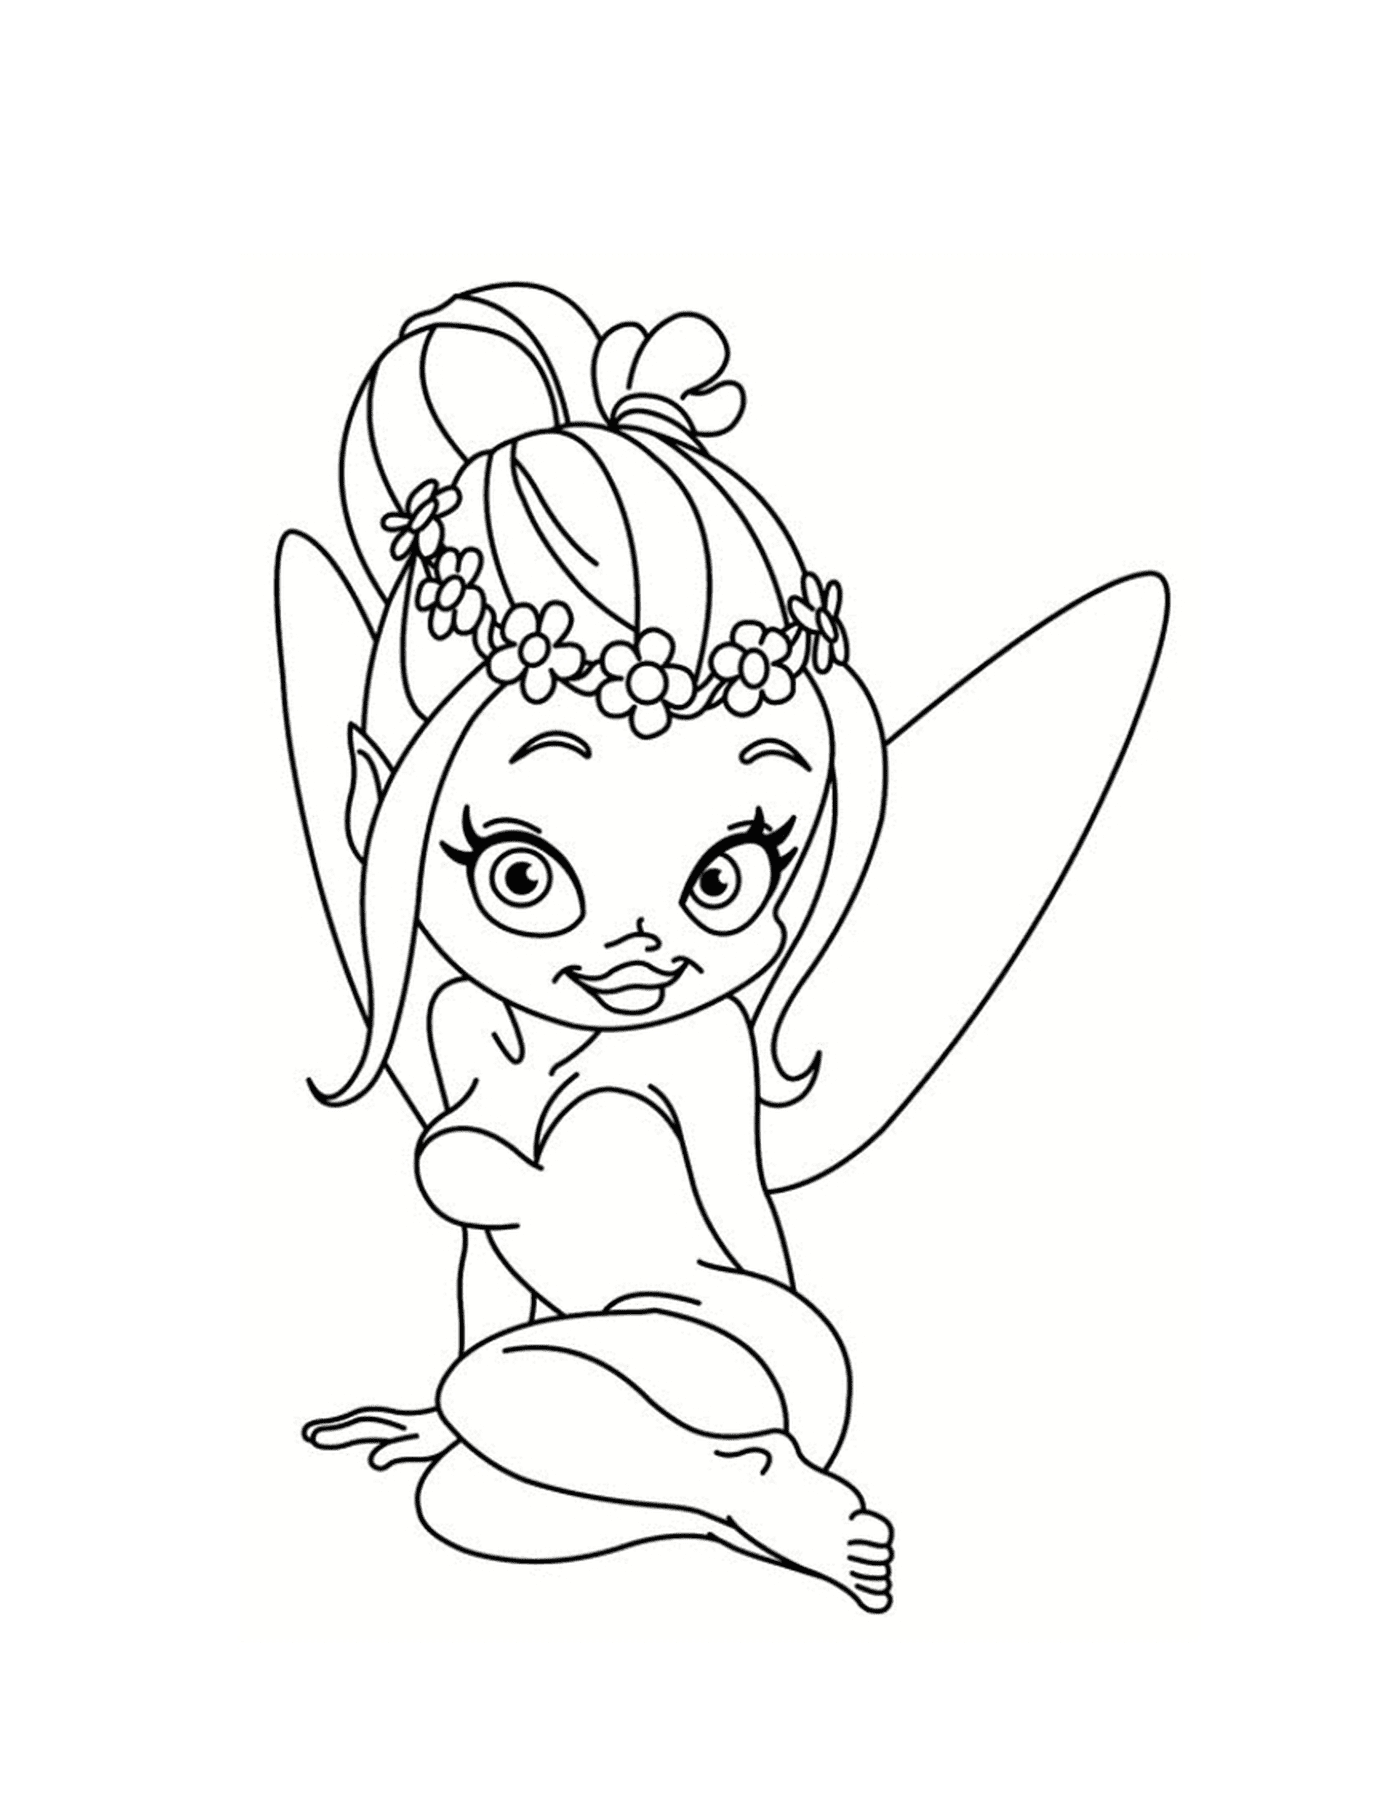  A fairy with a crown of flowers 